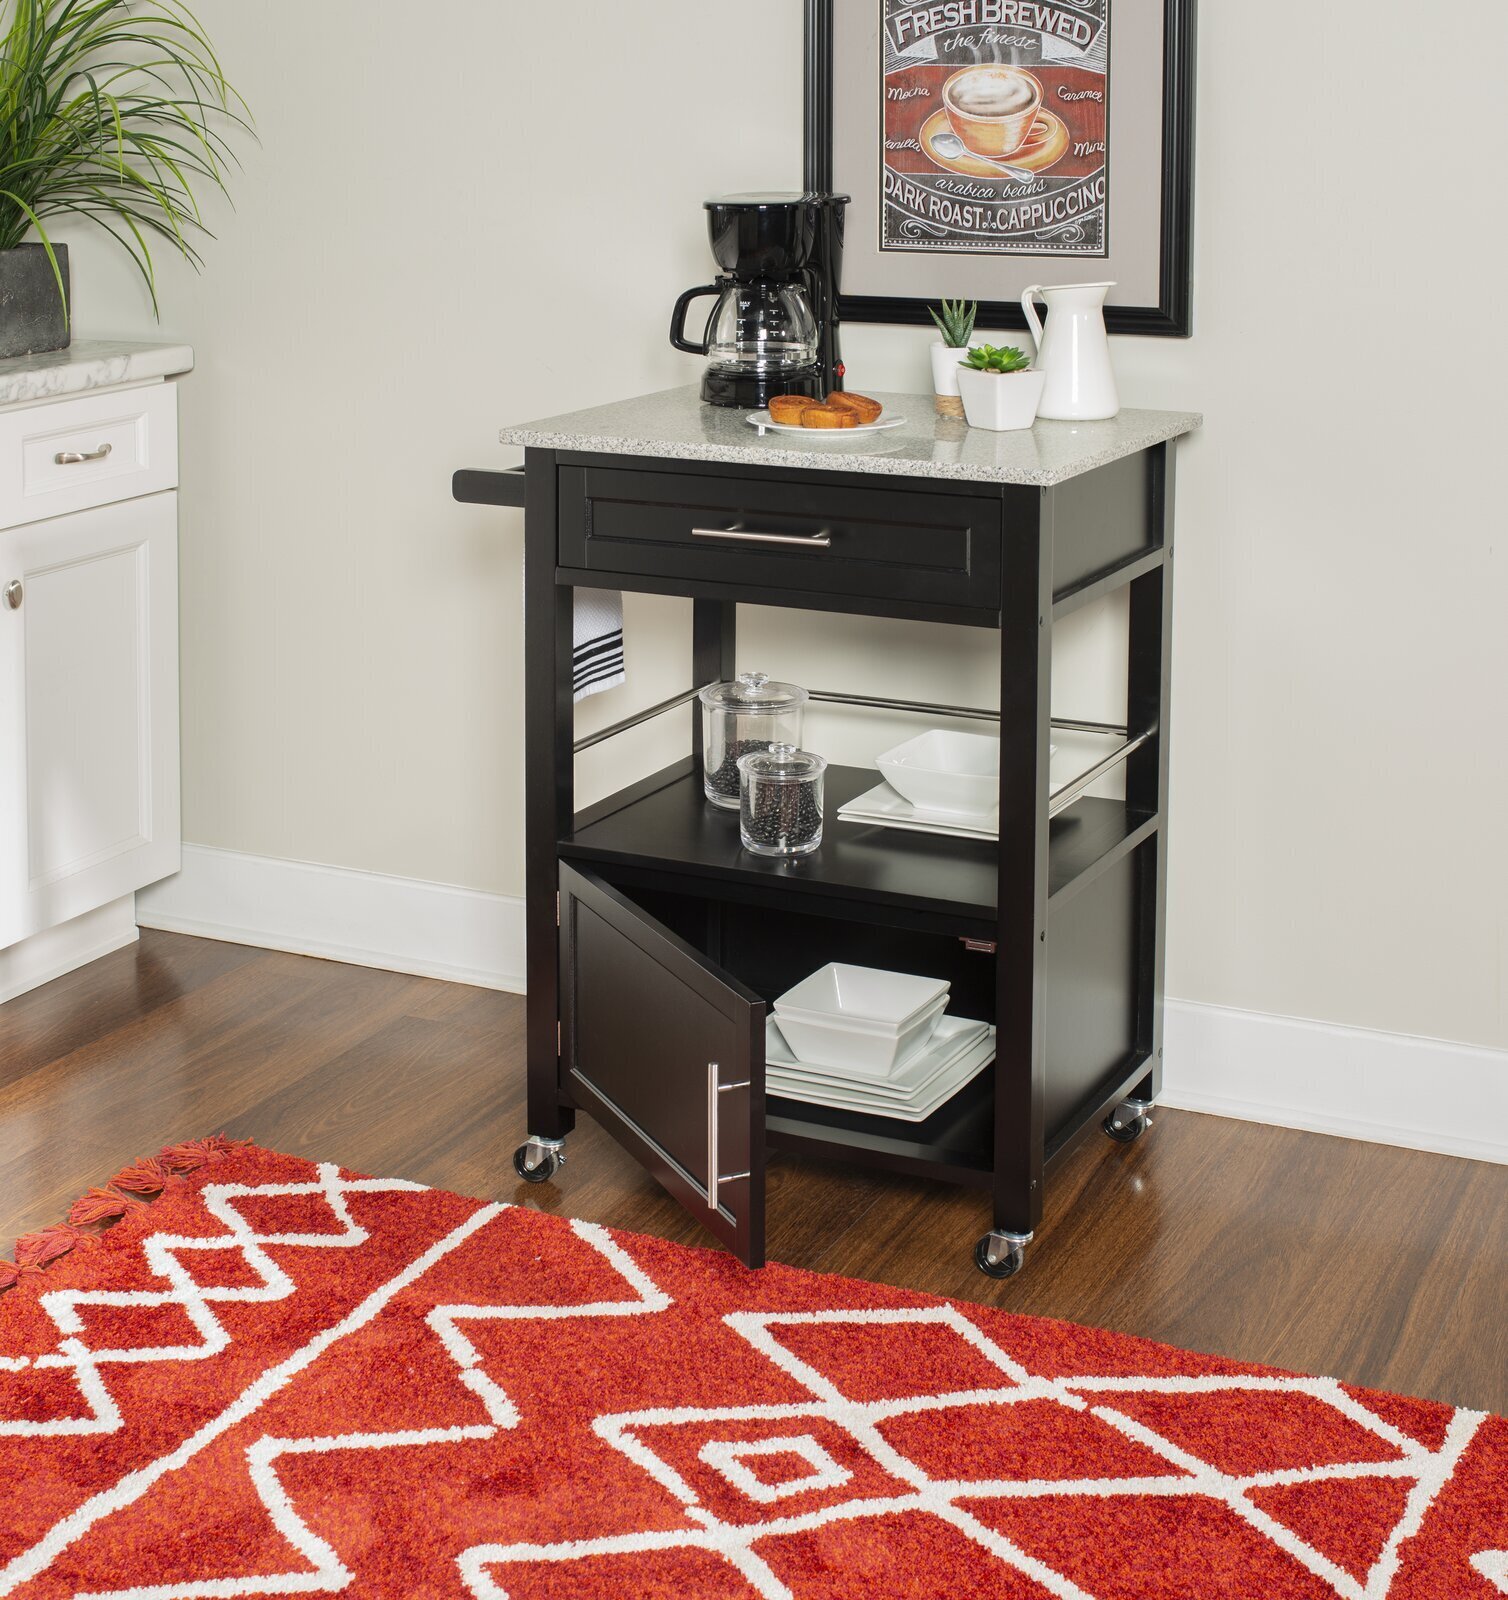 Compact Kitchen Island on Wheels with Granite Top